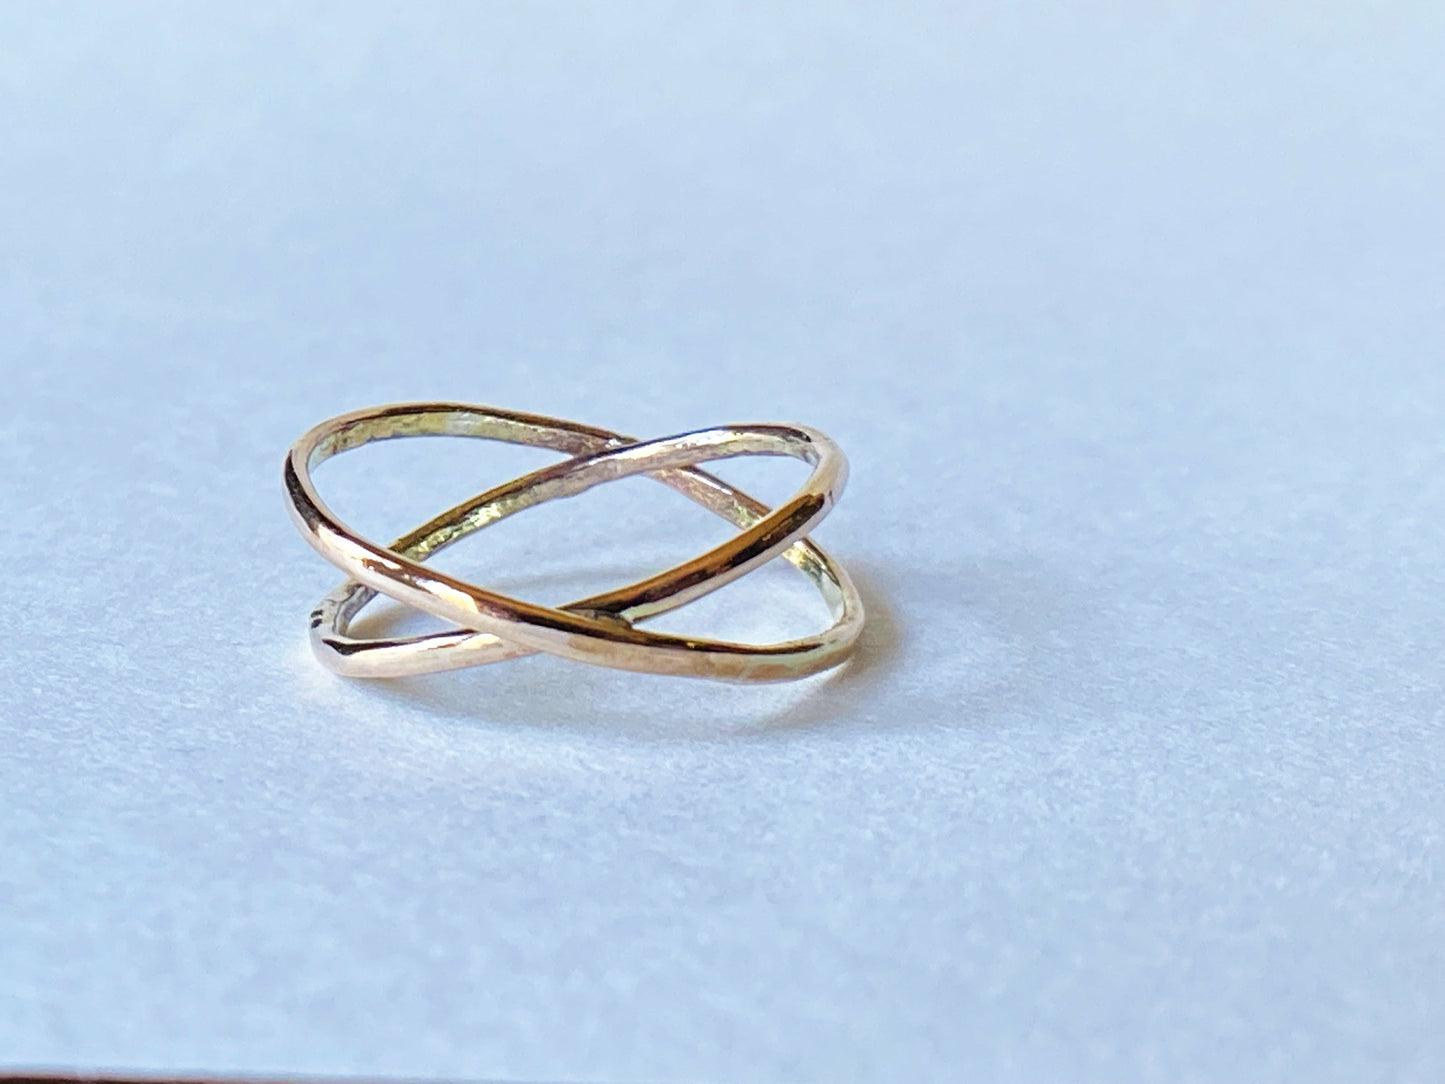 Two gold filled rings cross to make an x shape or a "twist" 